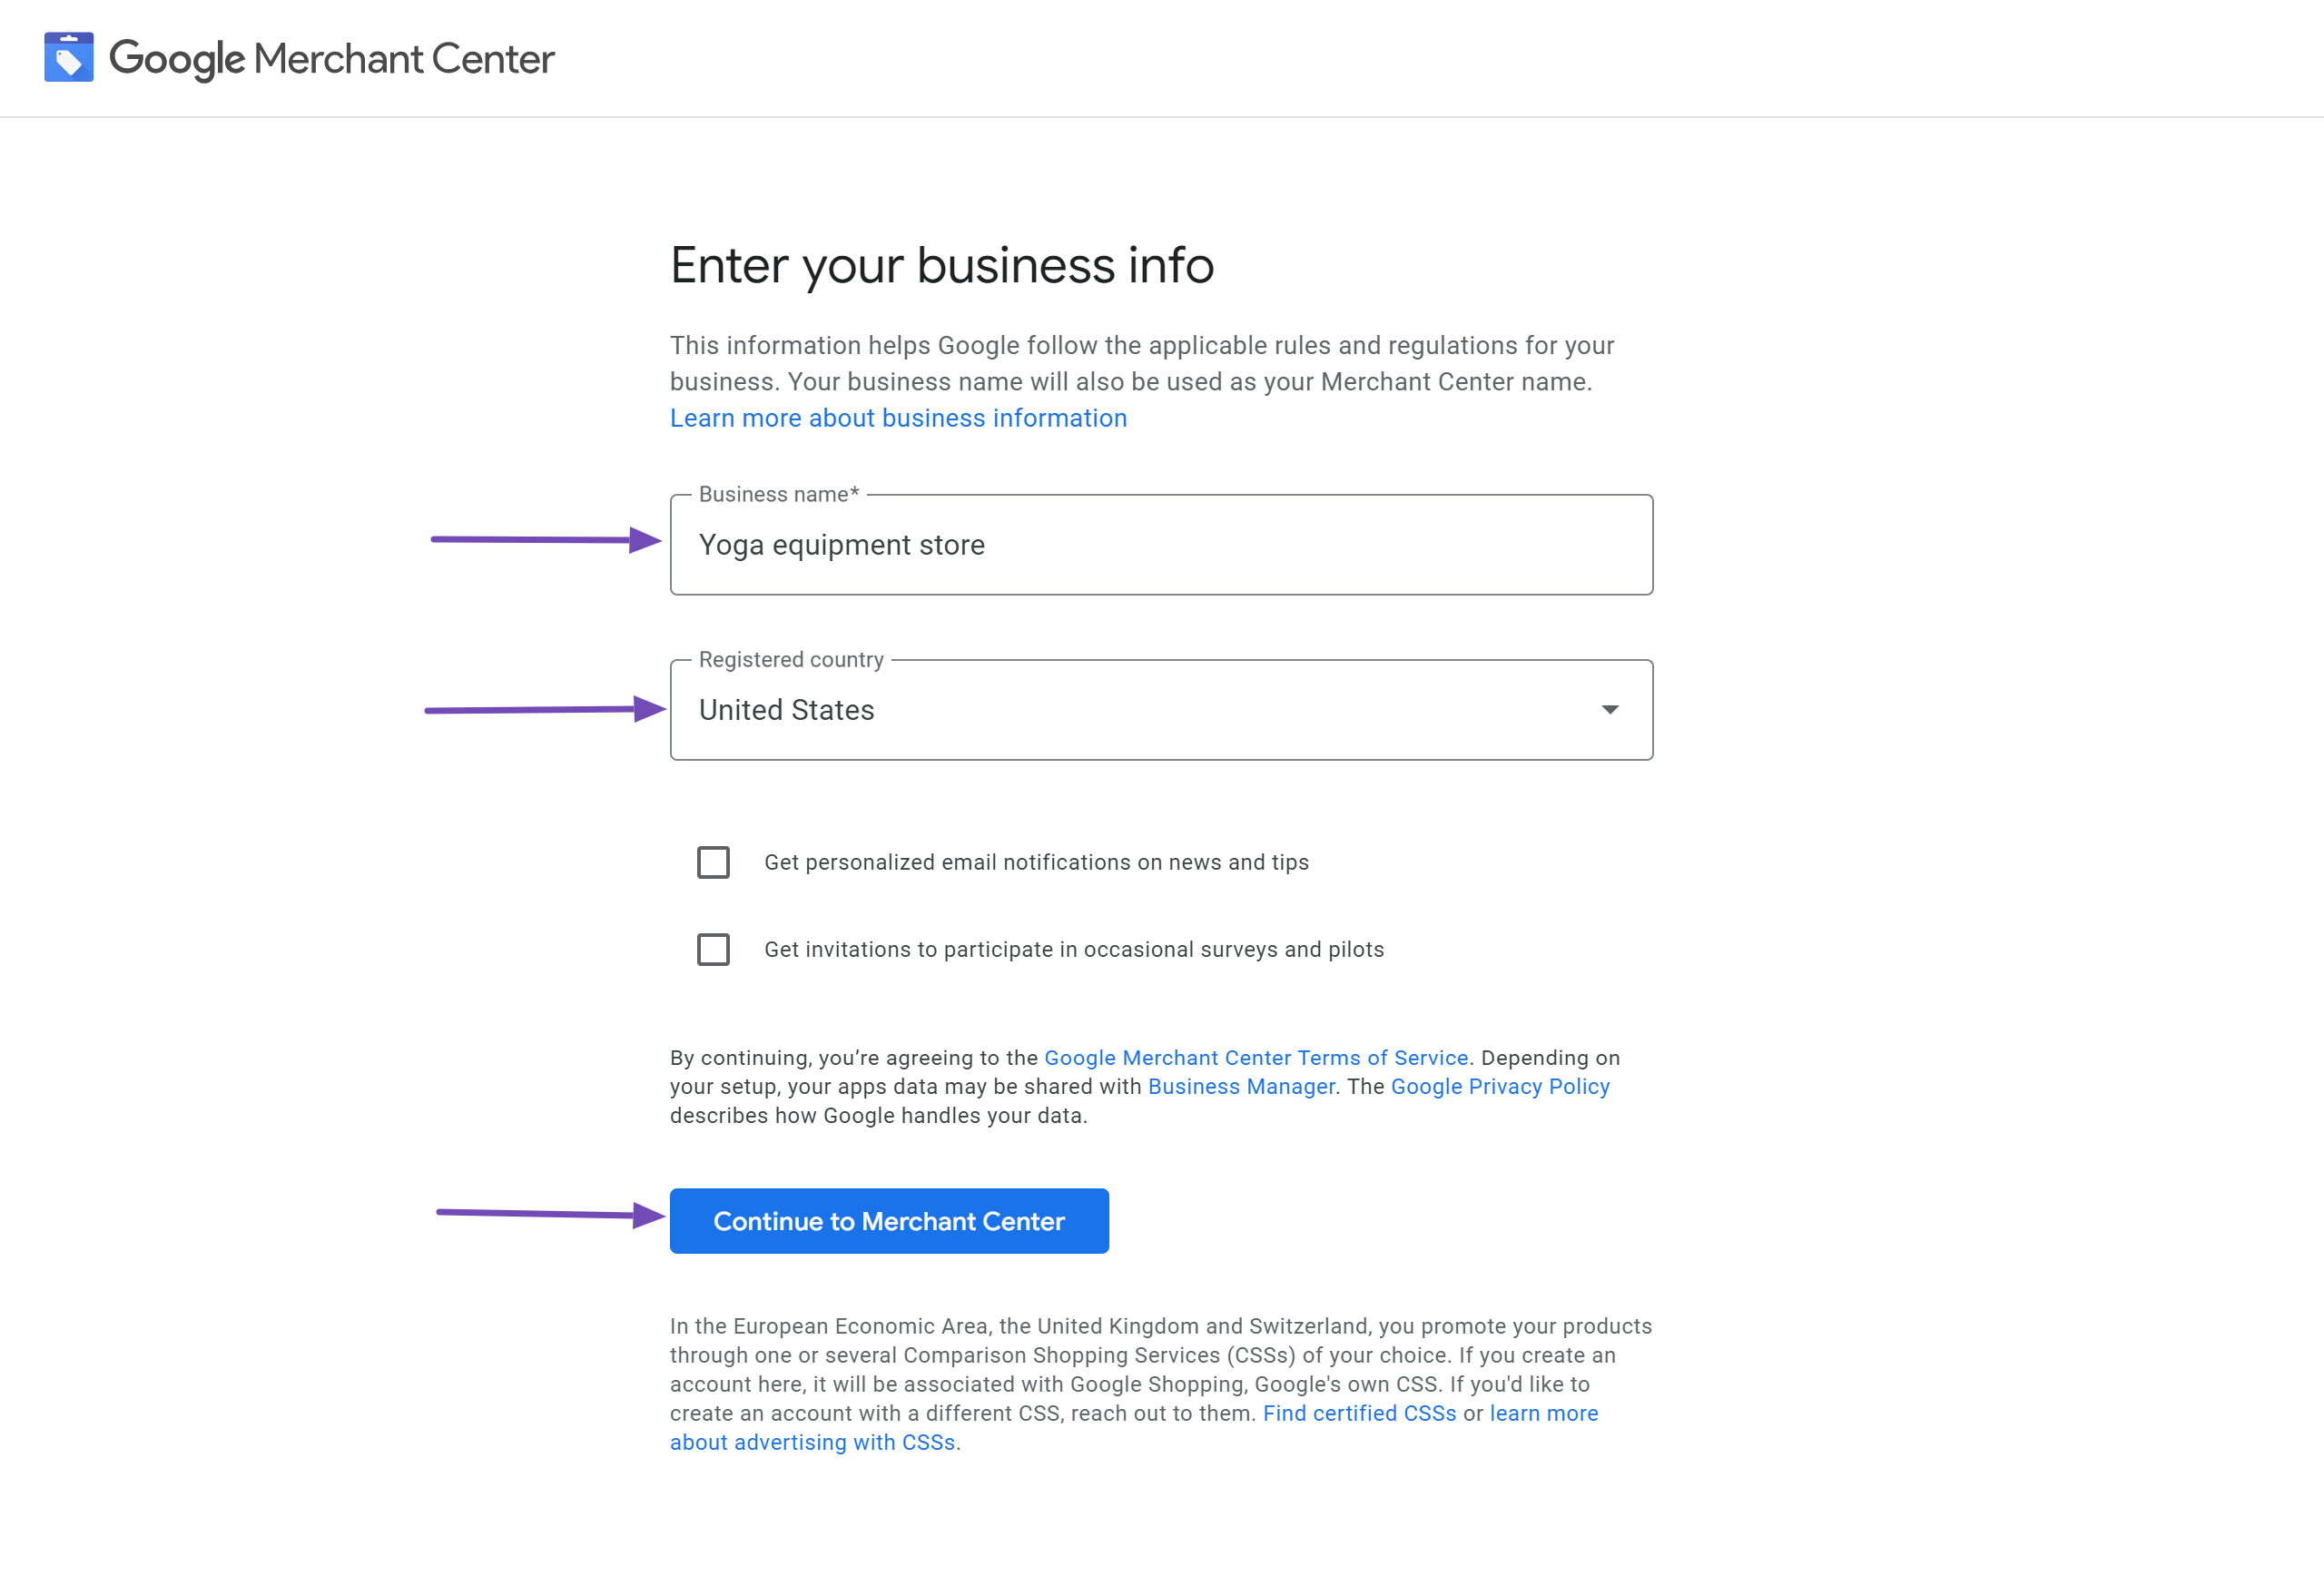 Enter your business name and location and click Continue to Merchant Center